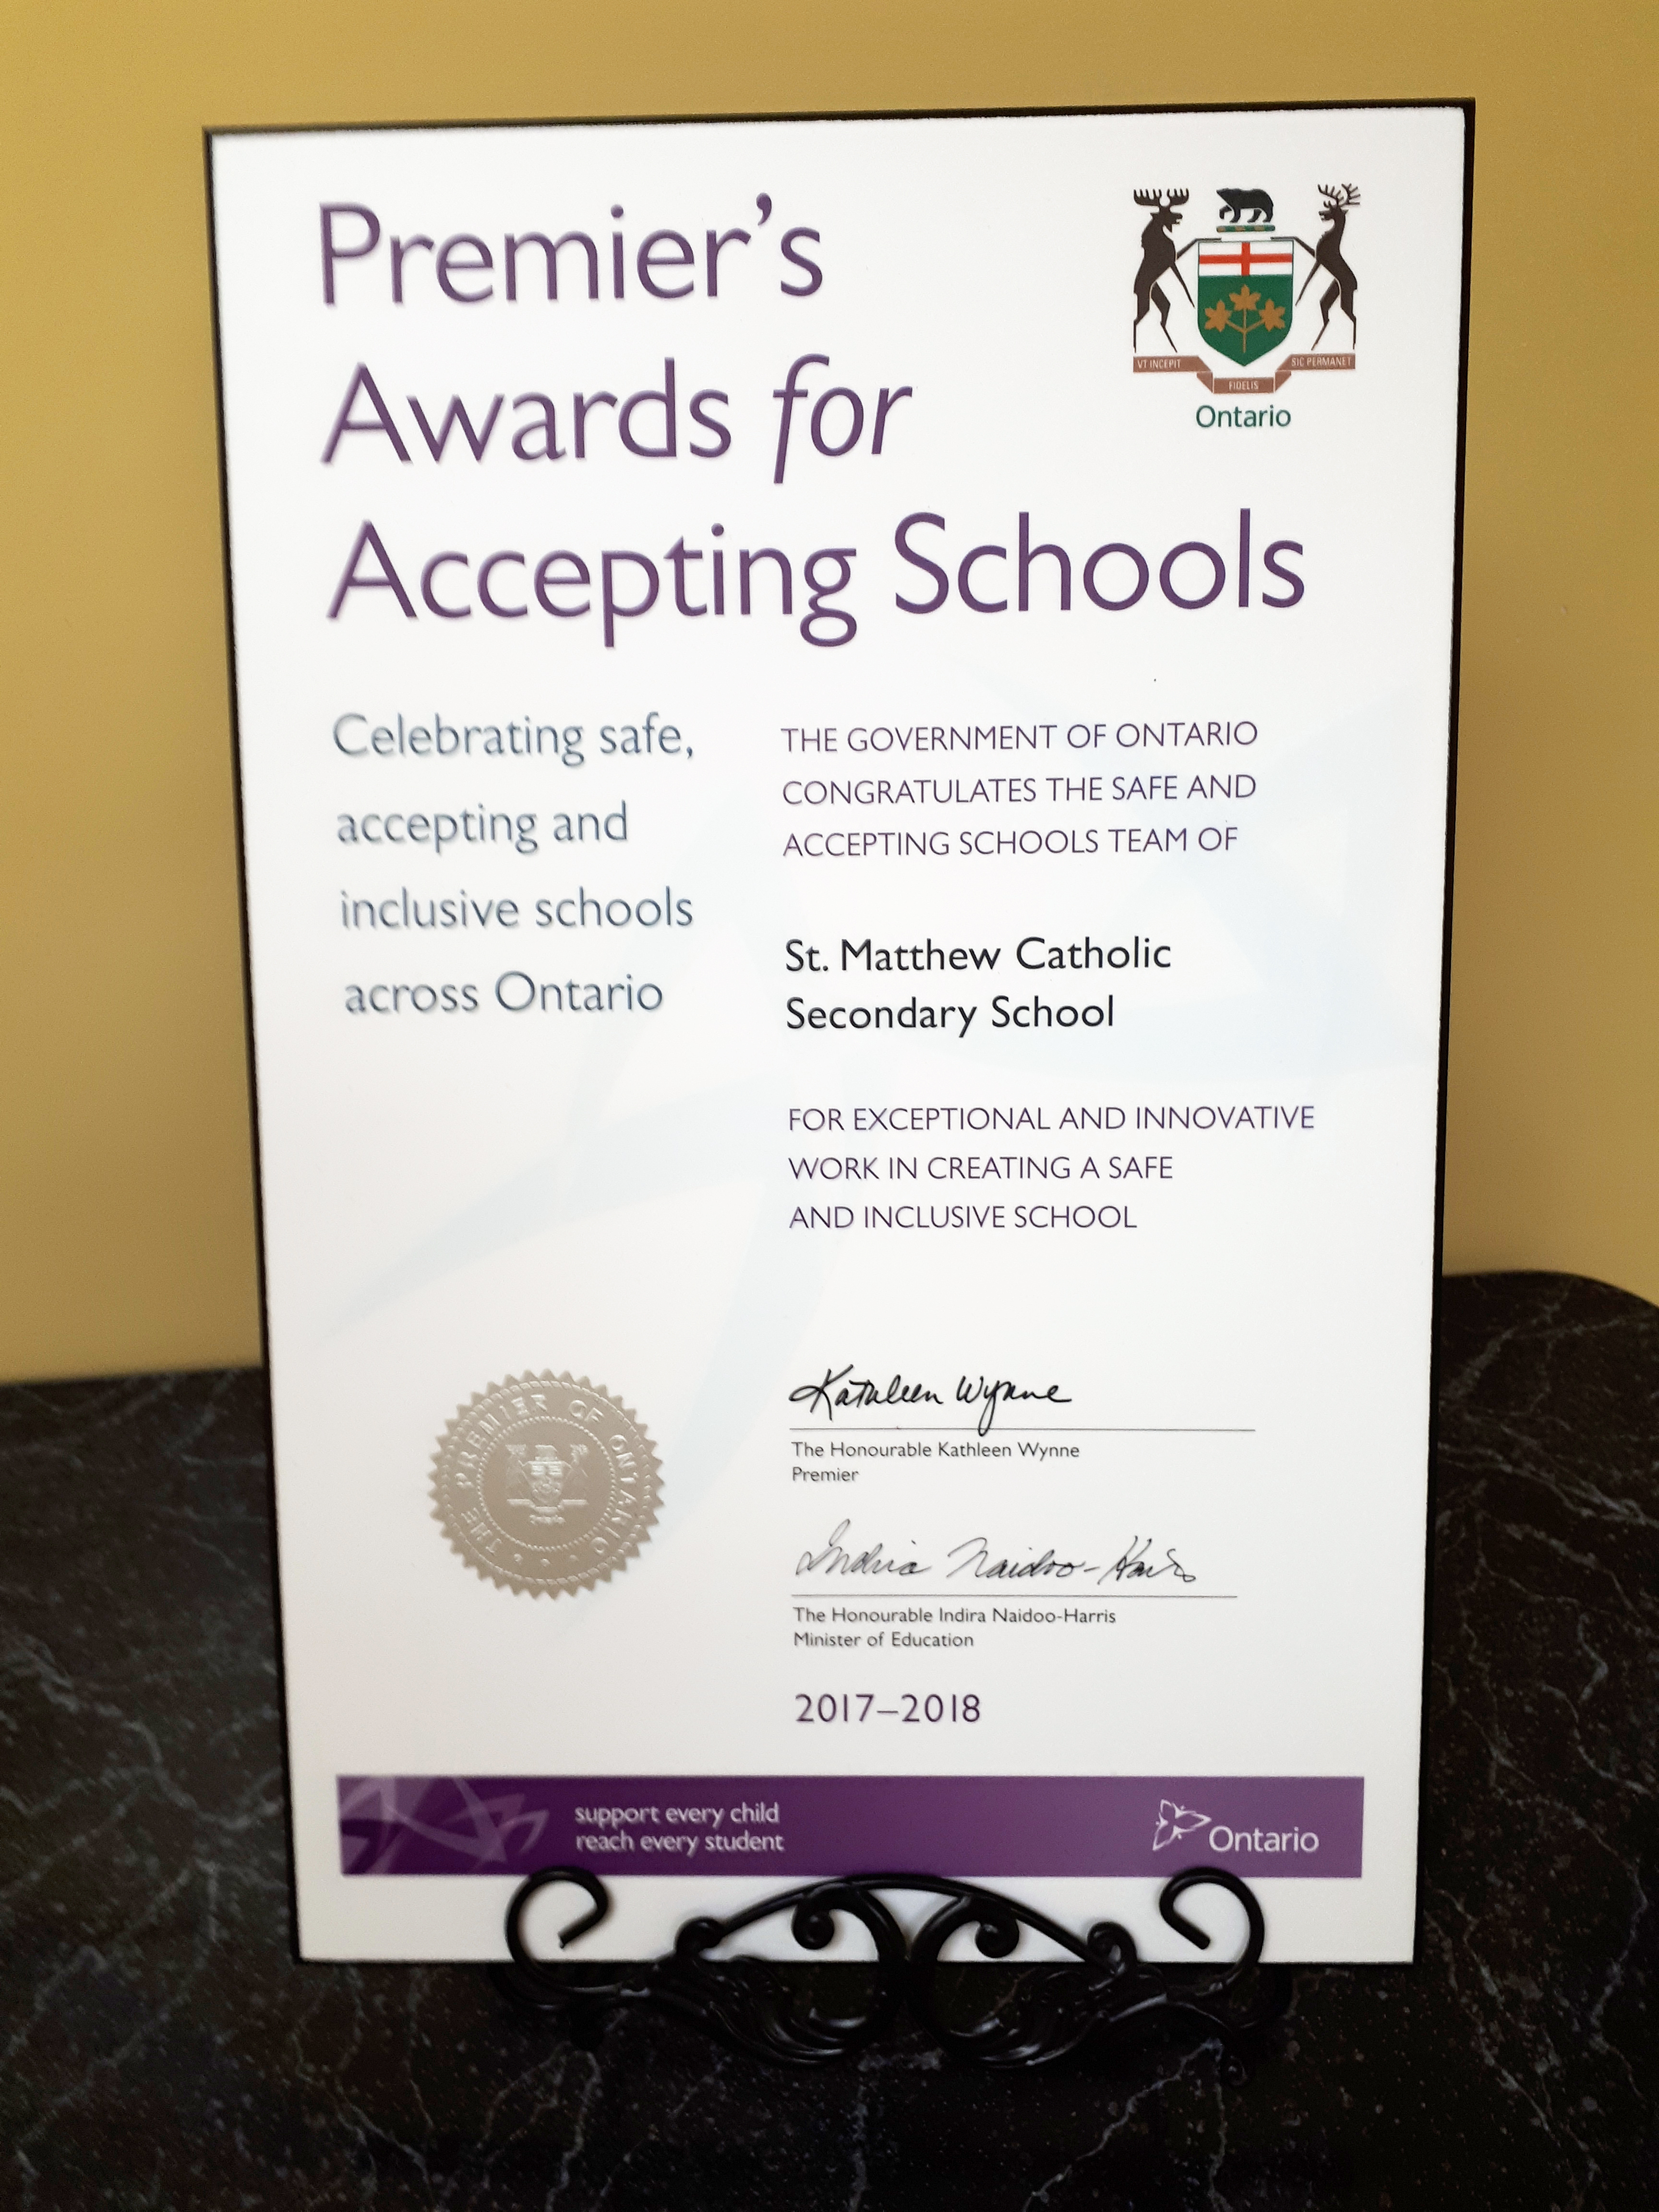 Thumbnail for the post titled: St. Matthew Catholic Secondary School – Premier’s Award for Accepting Schools